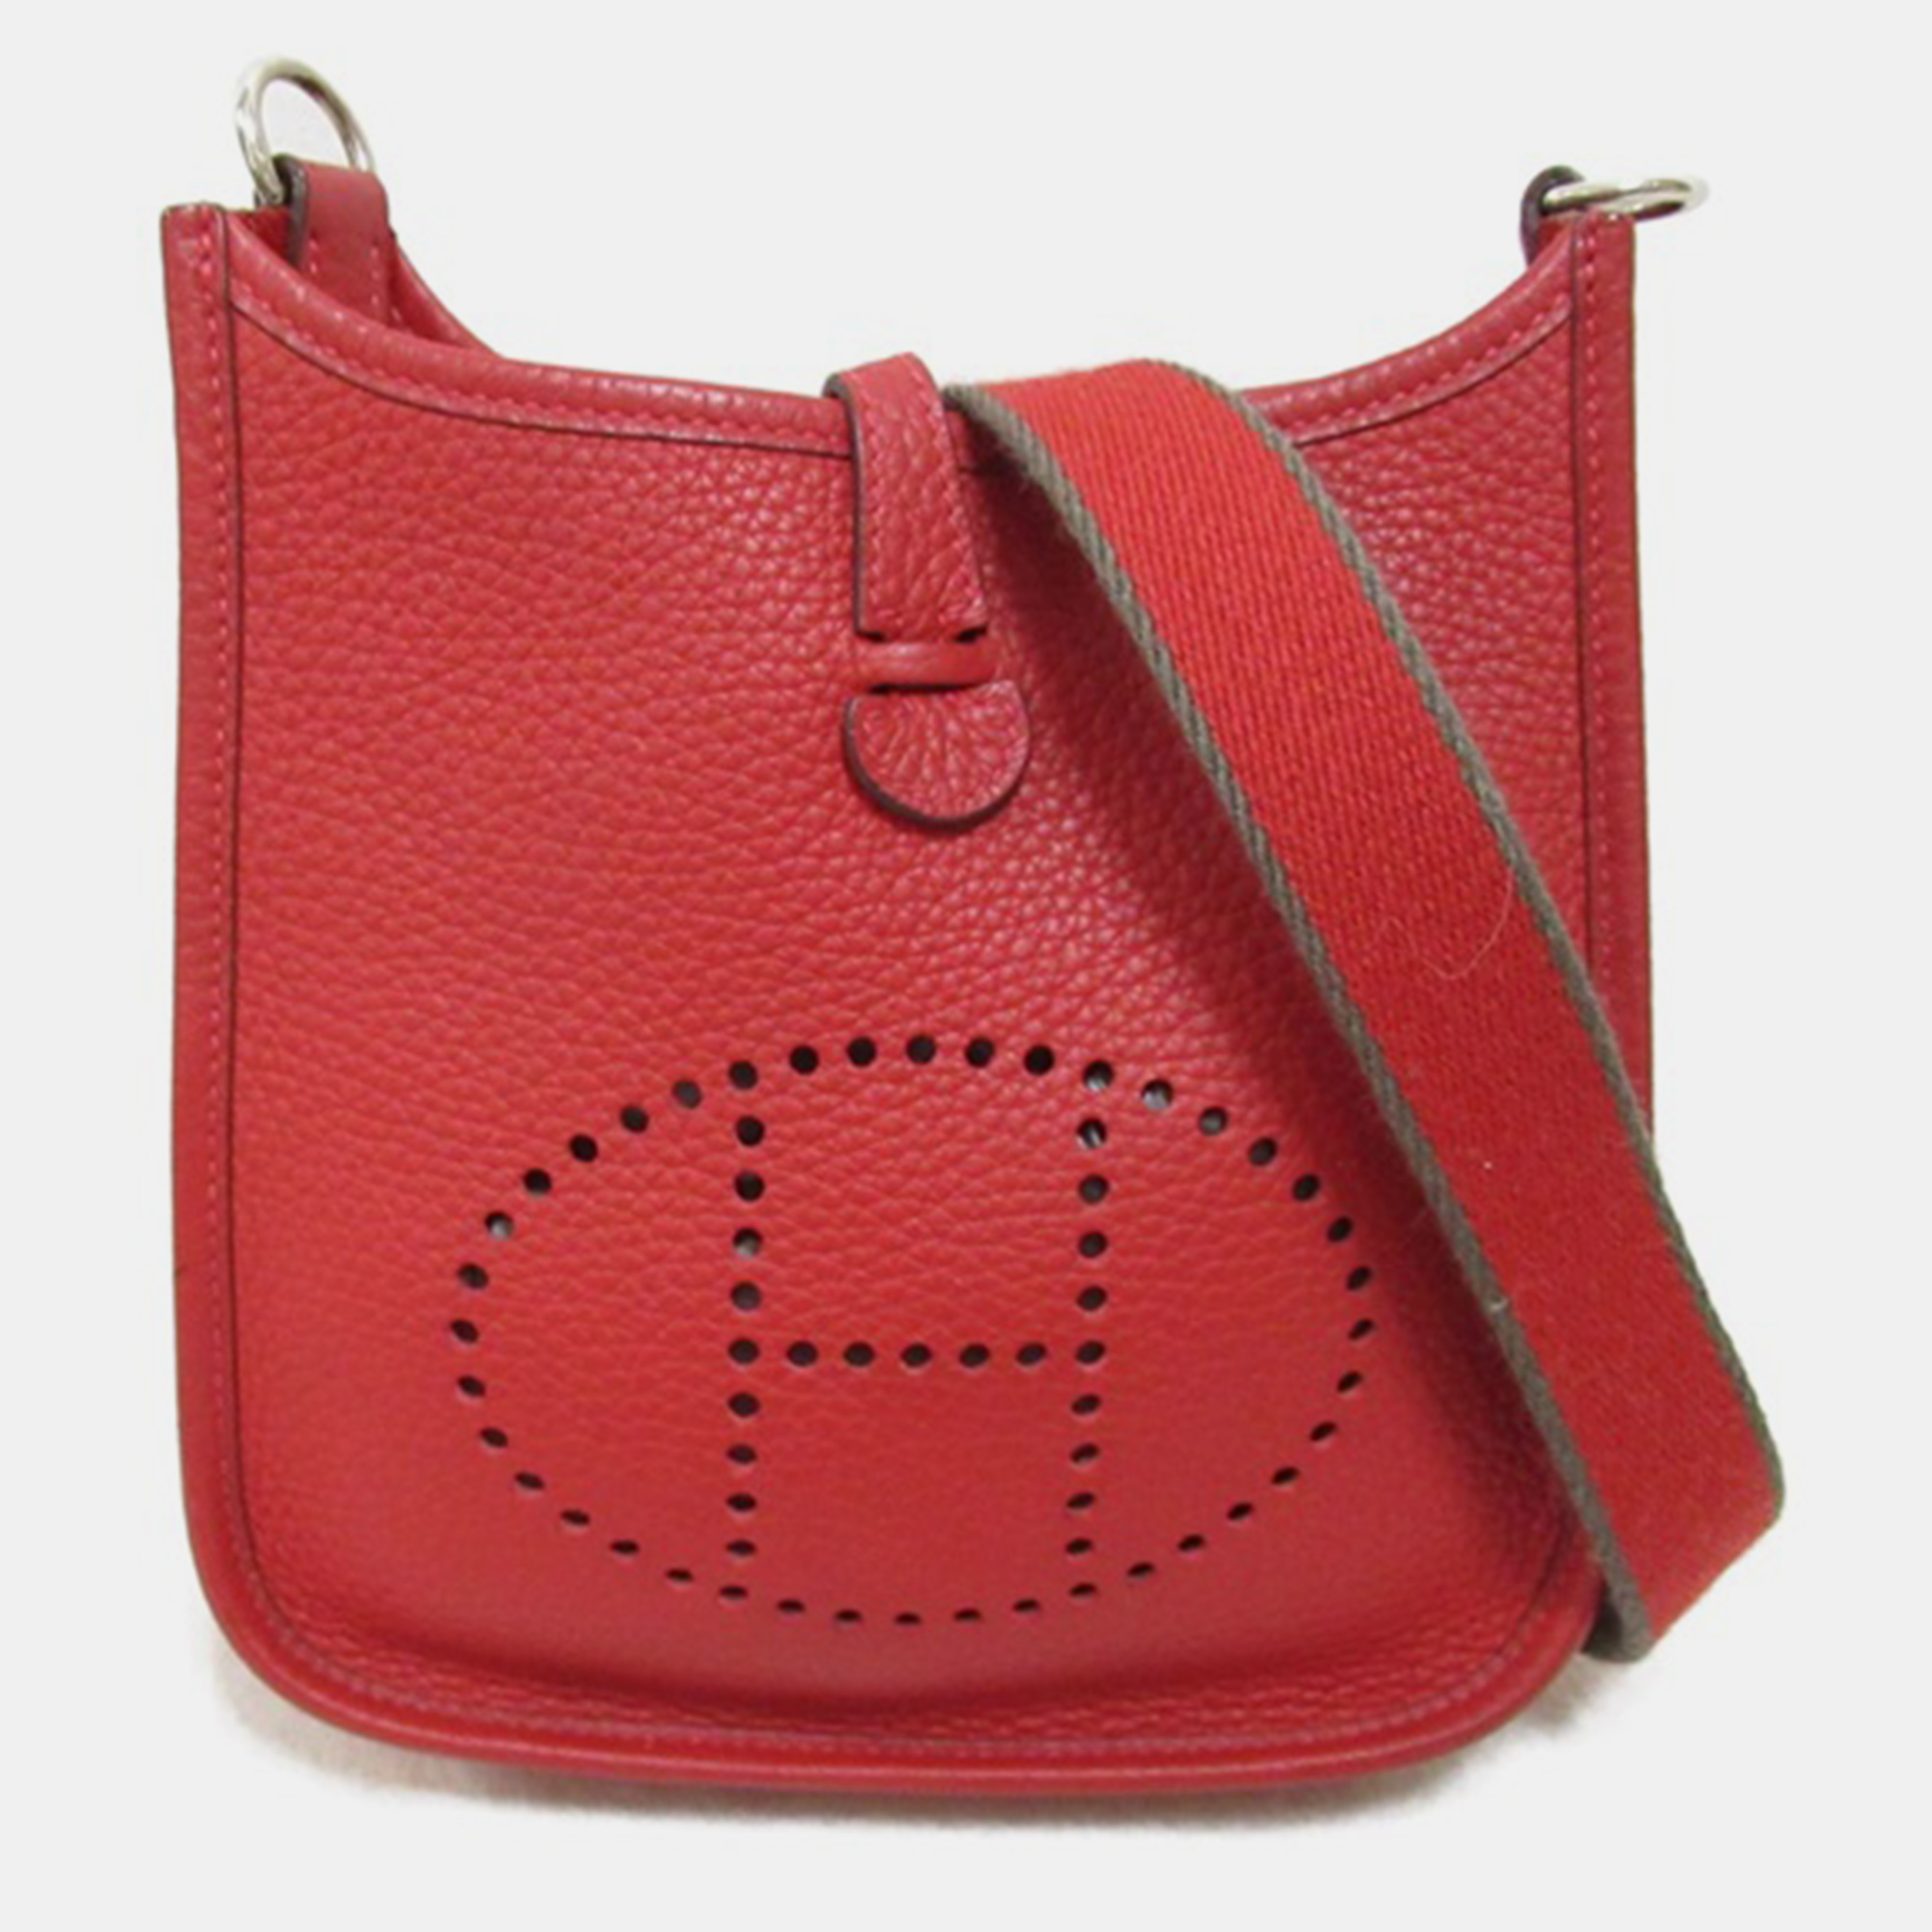 Hermes red leather clemence leather evelyne tpm bag